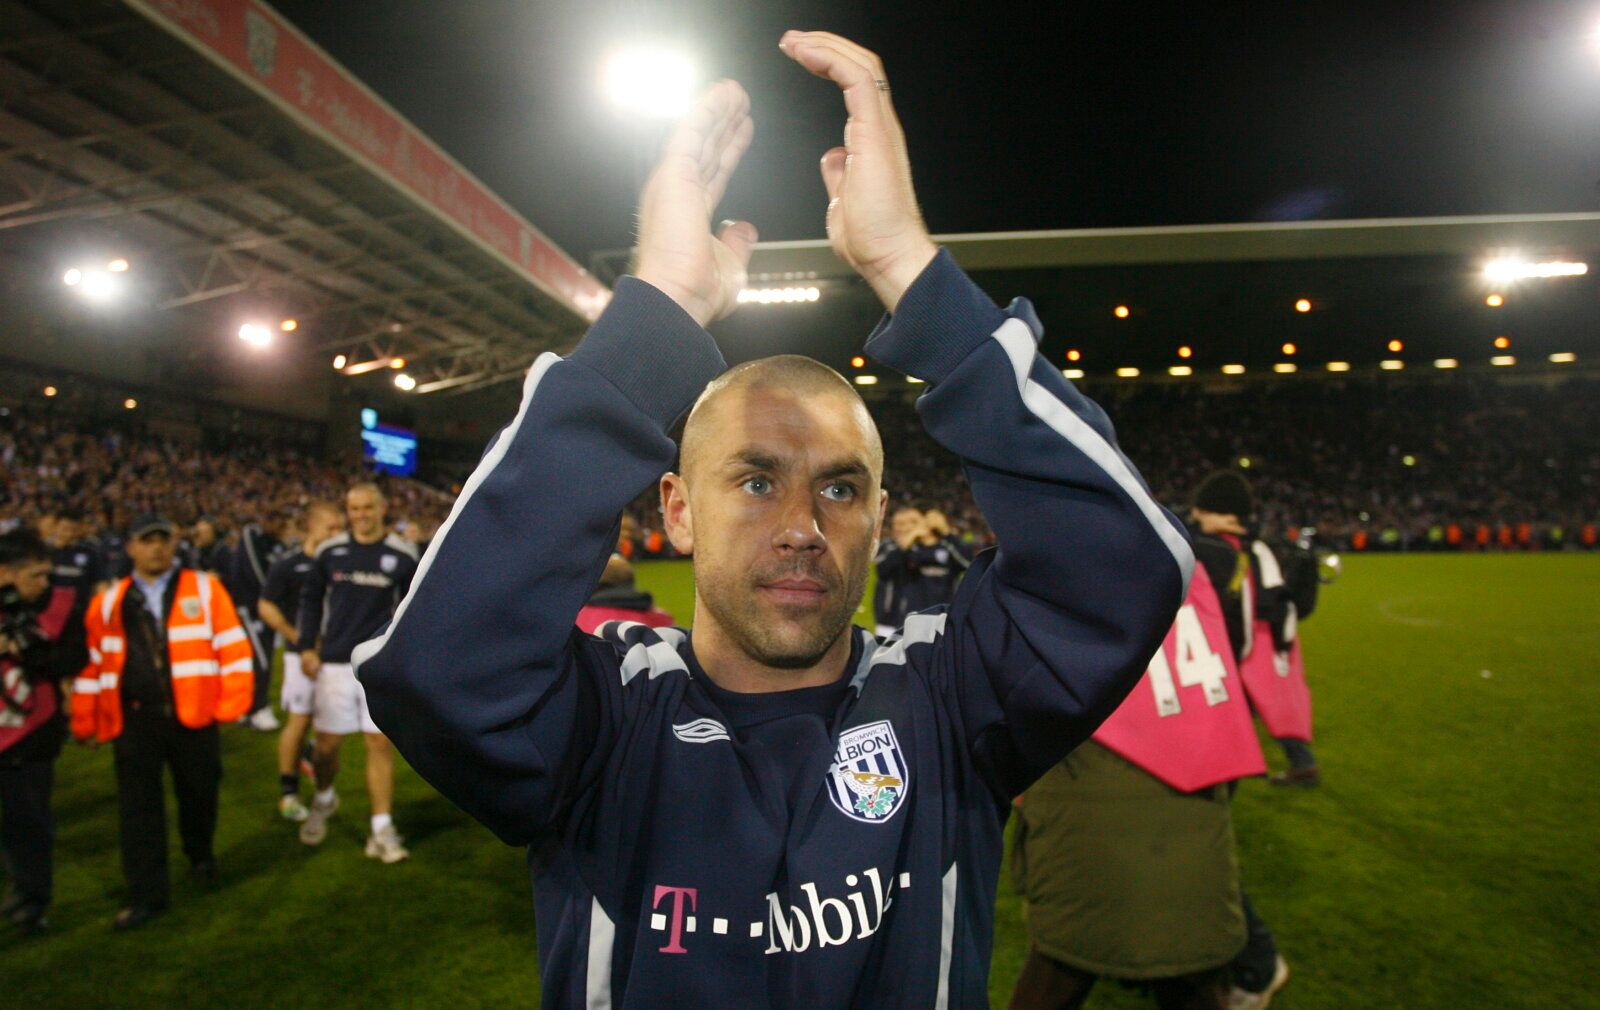 Football - West Bromwich Albion v Southampton - Coca-Cola Football League Championship - The Hawthorns - 07/08 - 28/4/08 
West Bromwich Albion's Kevin Phillips celebrates at the end 
Mandatory Credit: Action Images / Matthew Childs